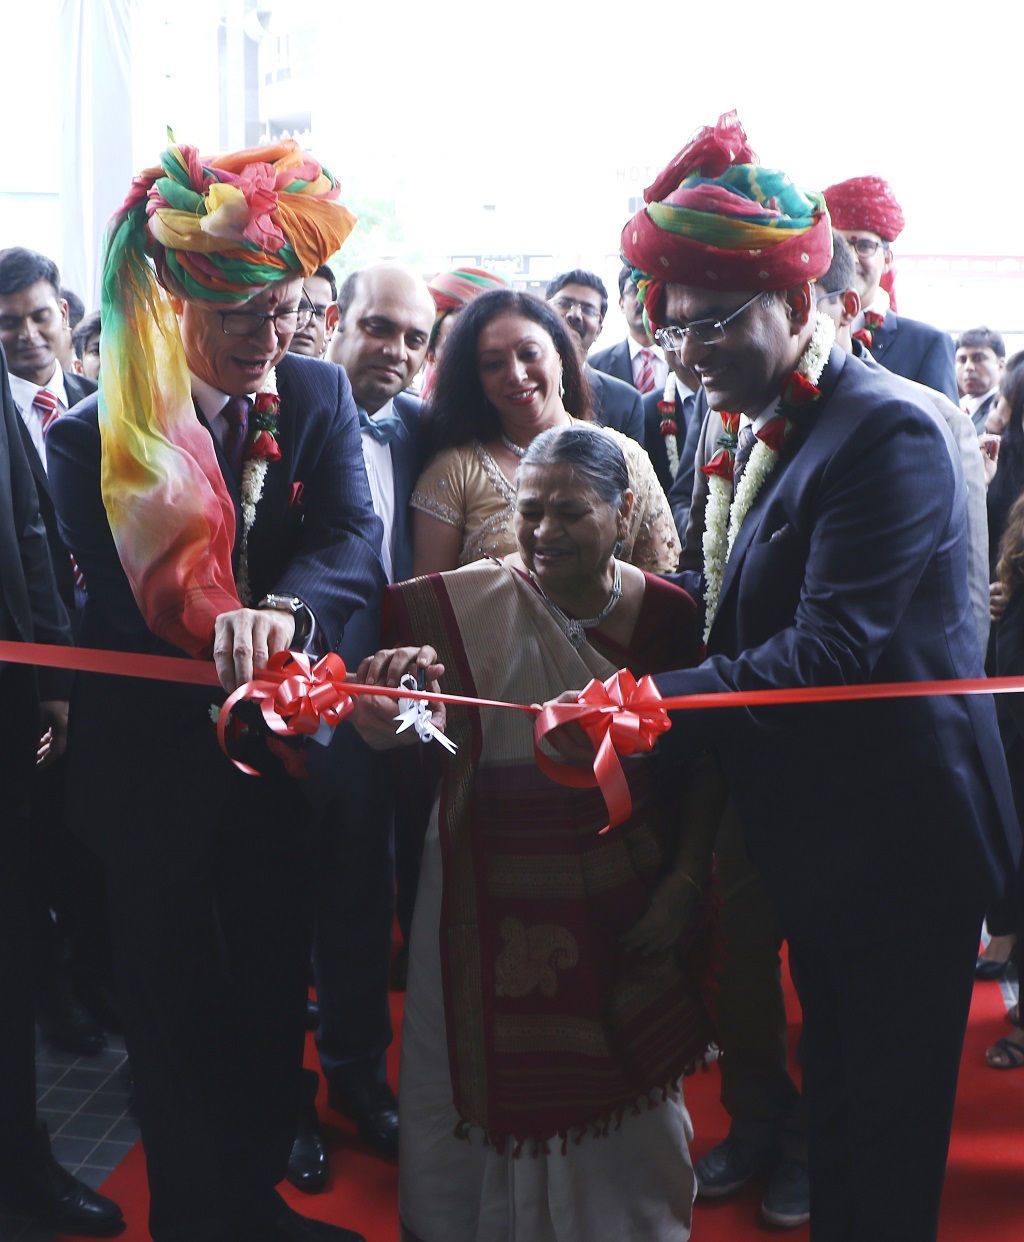 Mr. Roland Folger, Managing Director & CEO, Mercedes-Benz India and Mr. KM Thakkar, Executive Director, Emerald Motors inaugarating the largest 3S luxury car dealership at Ahmedabad